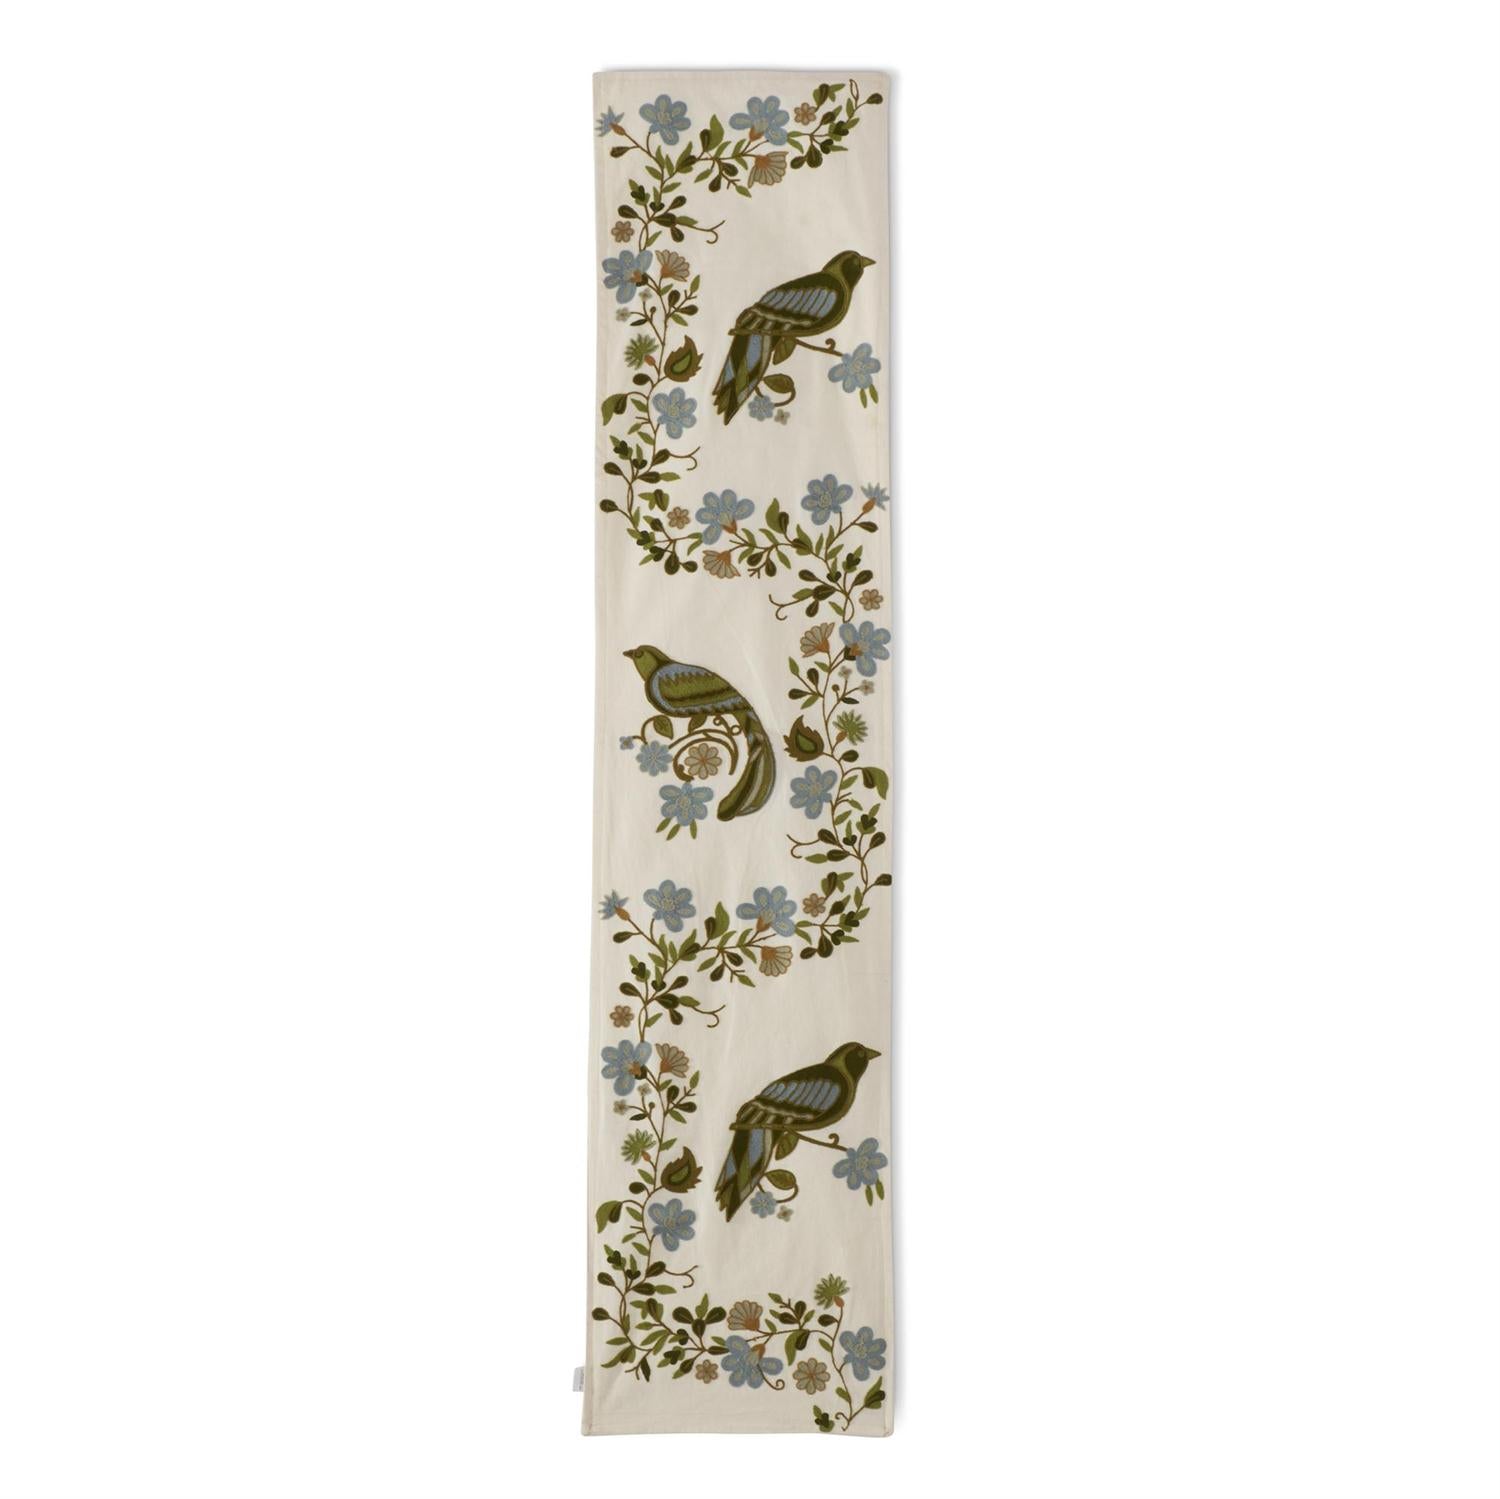 72 INCH BLUE GREEN FLORAL & BIRD EMBROIDERED TABLE RUNNER